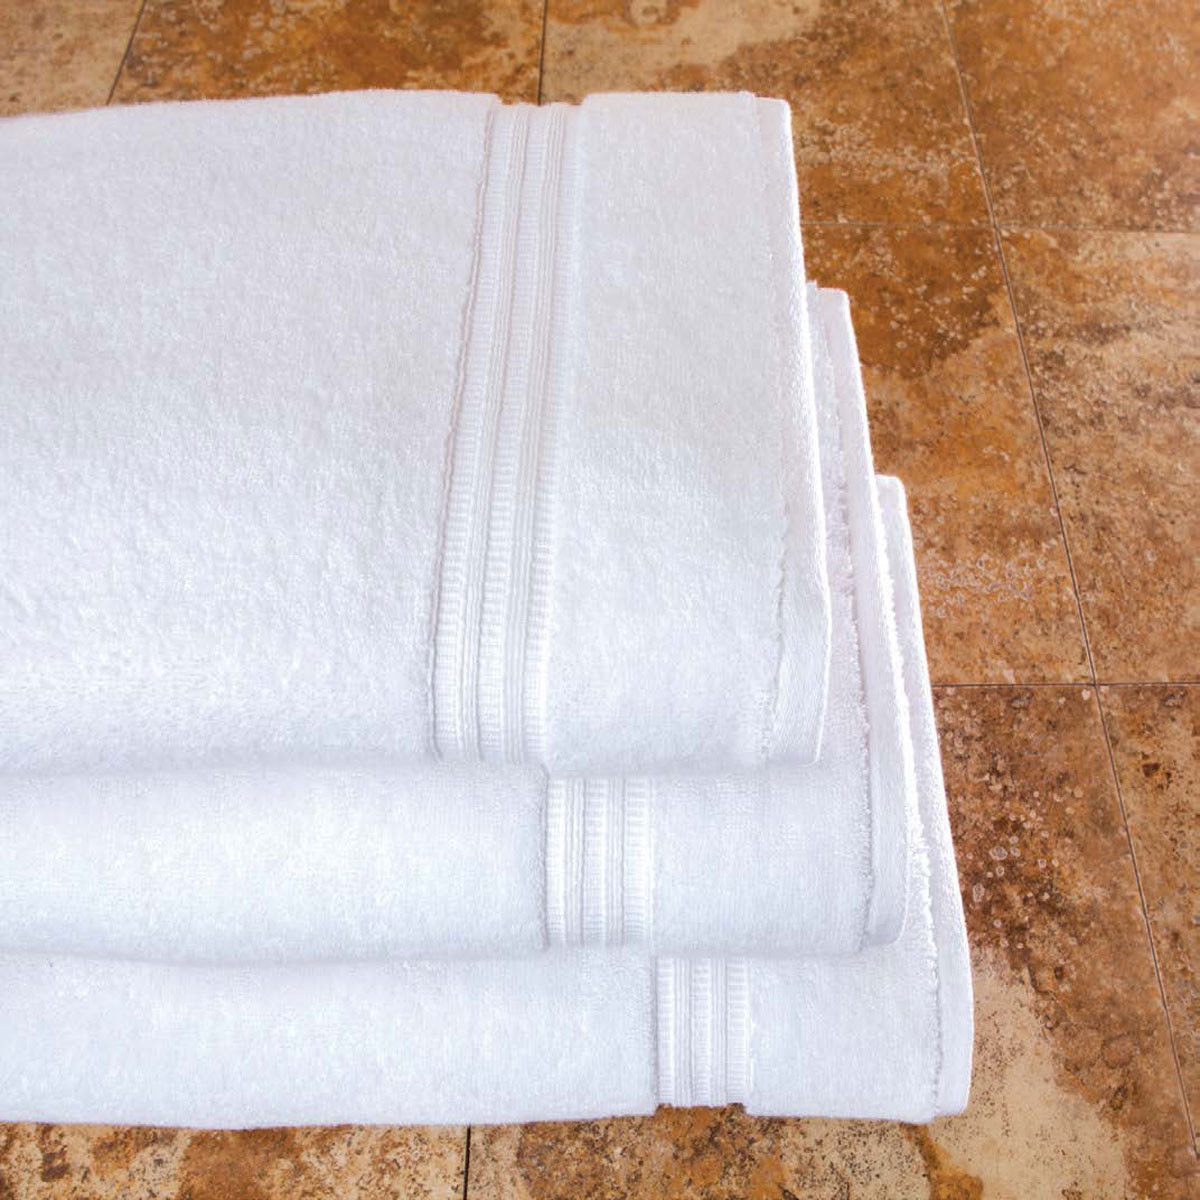 I'm interested in purchasing luxury bath towels bulk, are these the best fit?